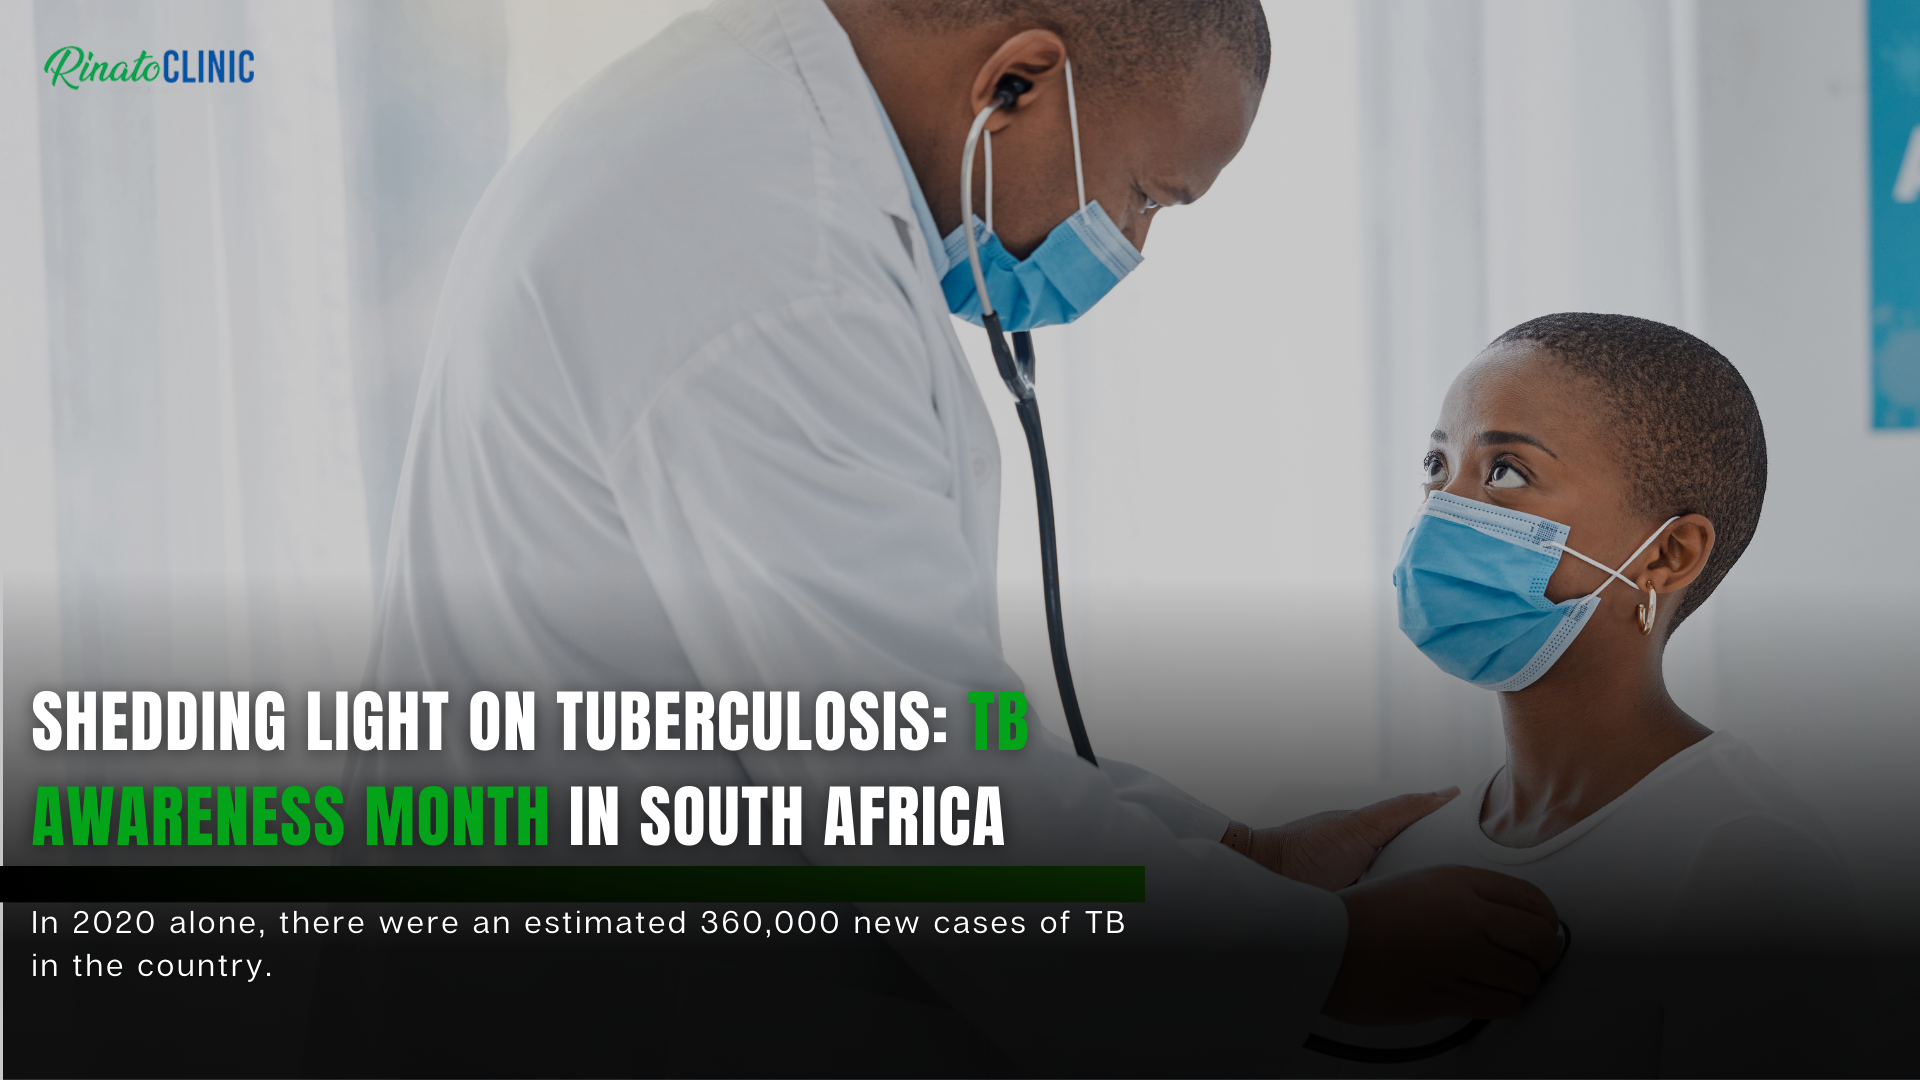 Read more about the article Shedding Light on Tuberculosis: TB Awareness Month in South Africa.